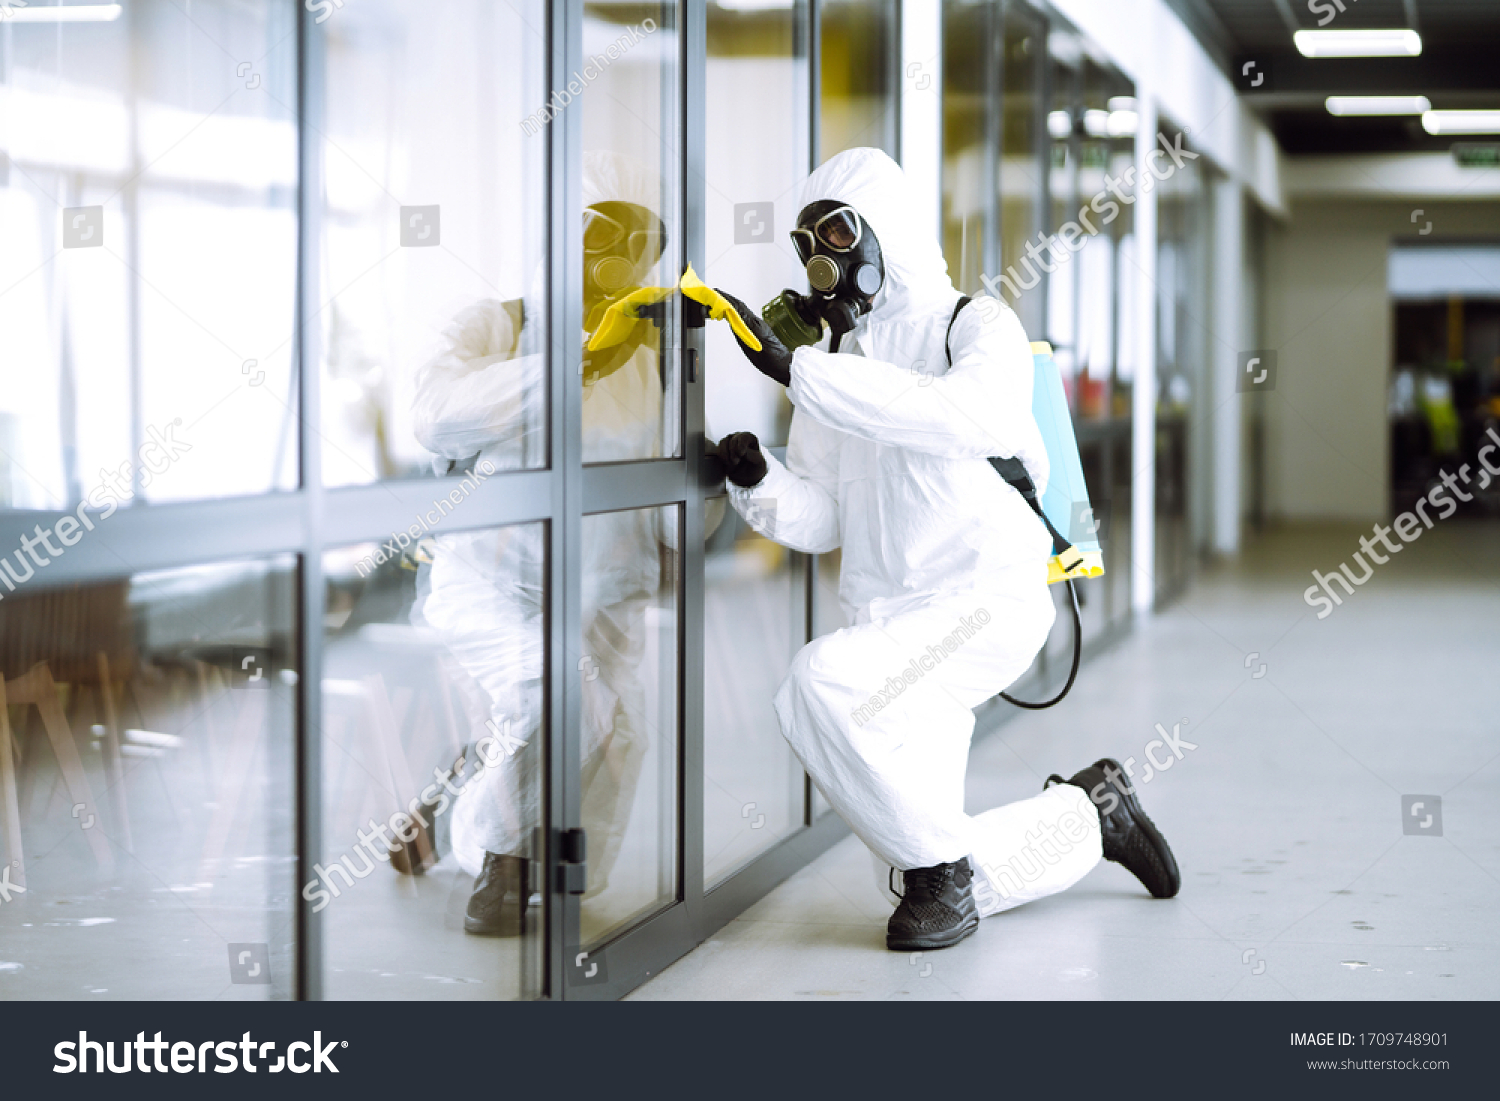 Man in protective hazmat suit washes door handles in office to preventing the spread of coronavirus, pandemic in quarantine city. Cleaning and disinfection of office. Covid-19. #1709748901